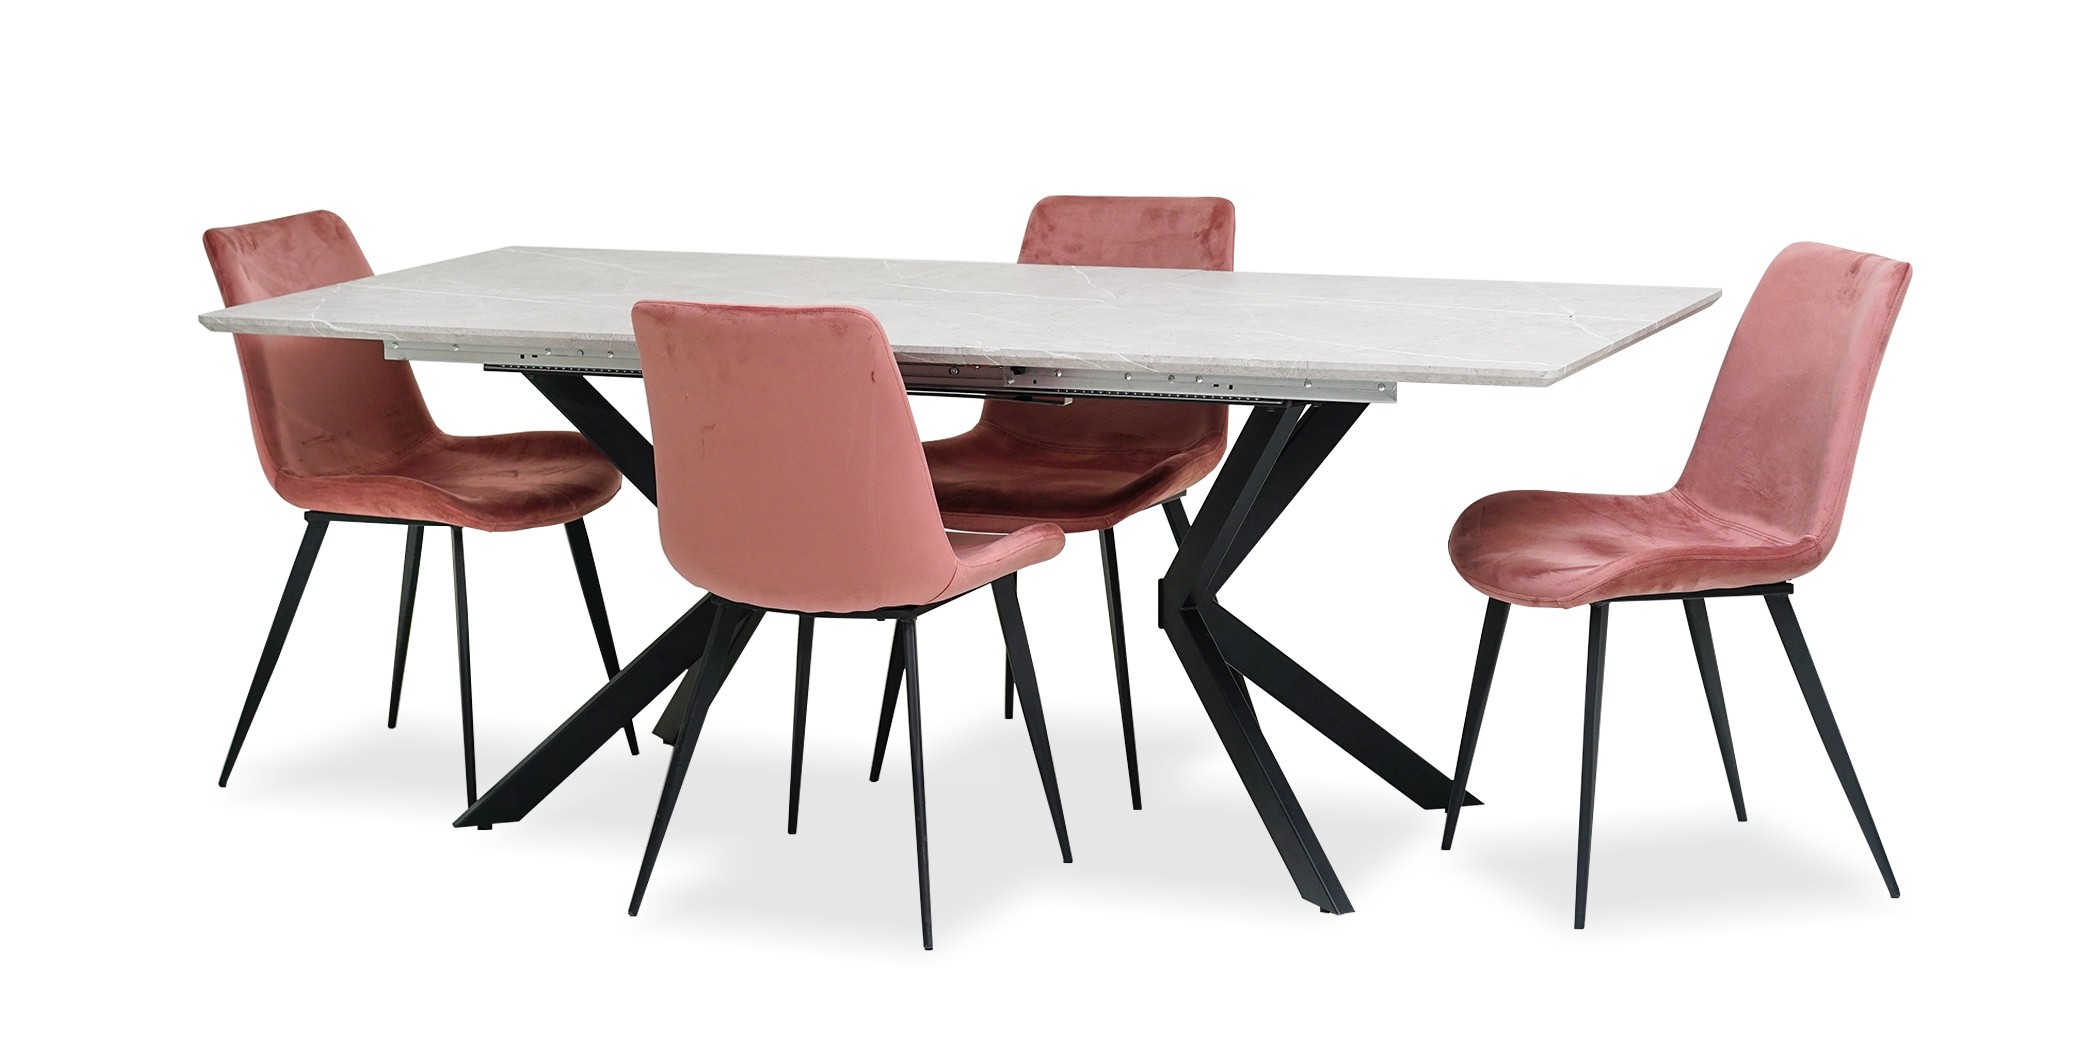 Domenica Table & 6 Chairs Pink